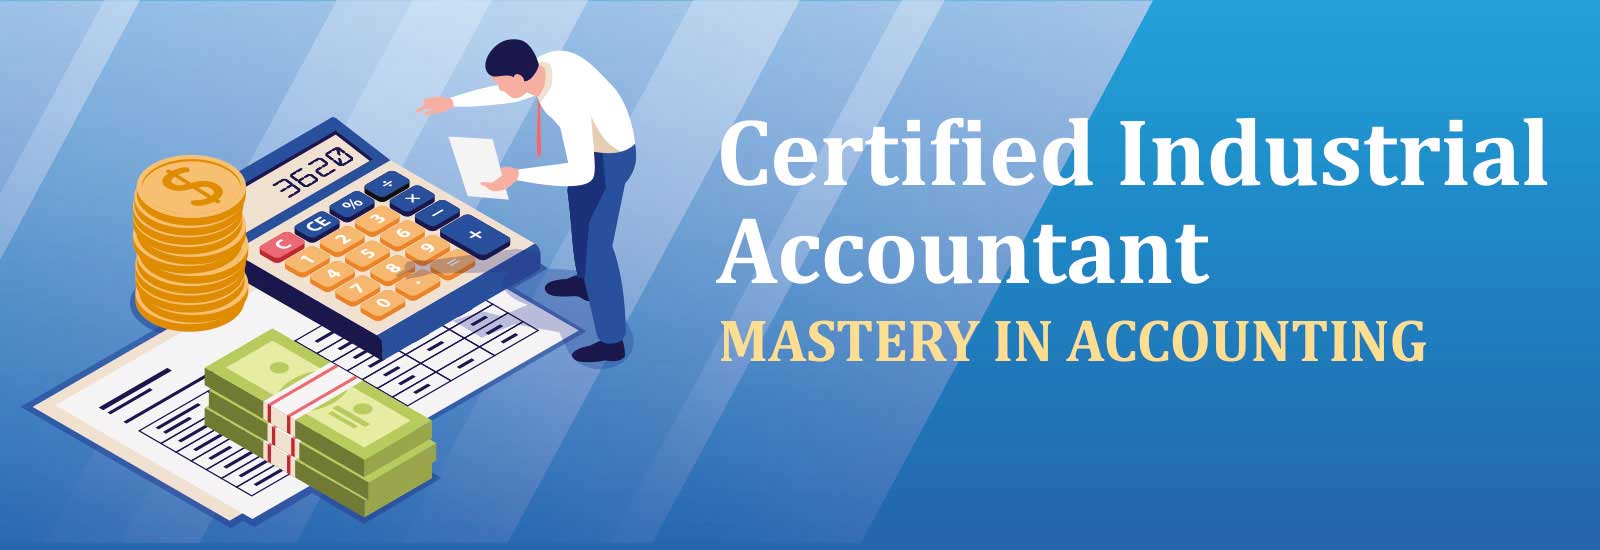 Certified Industrial Accountant Course